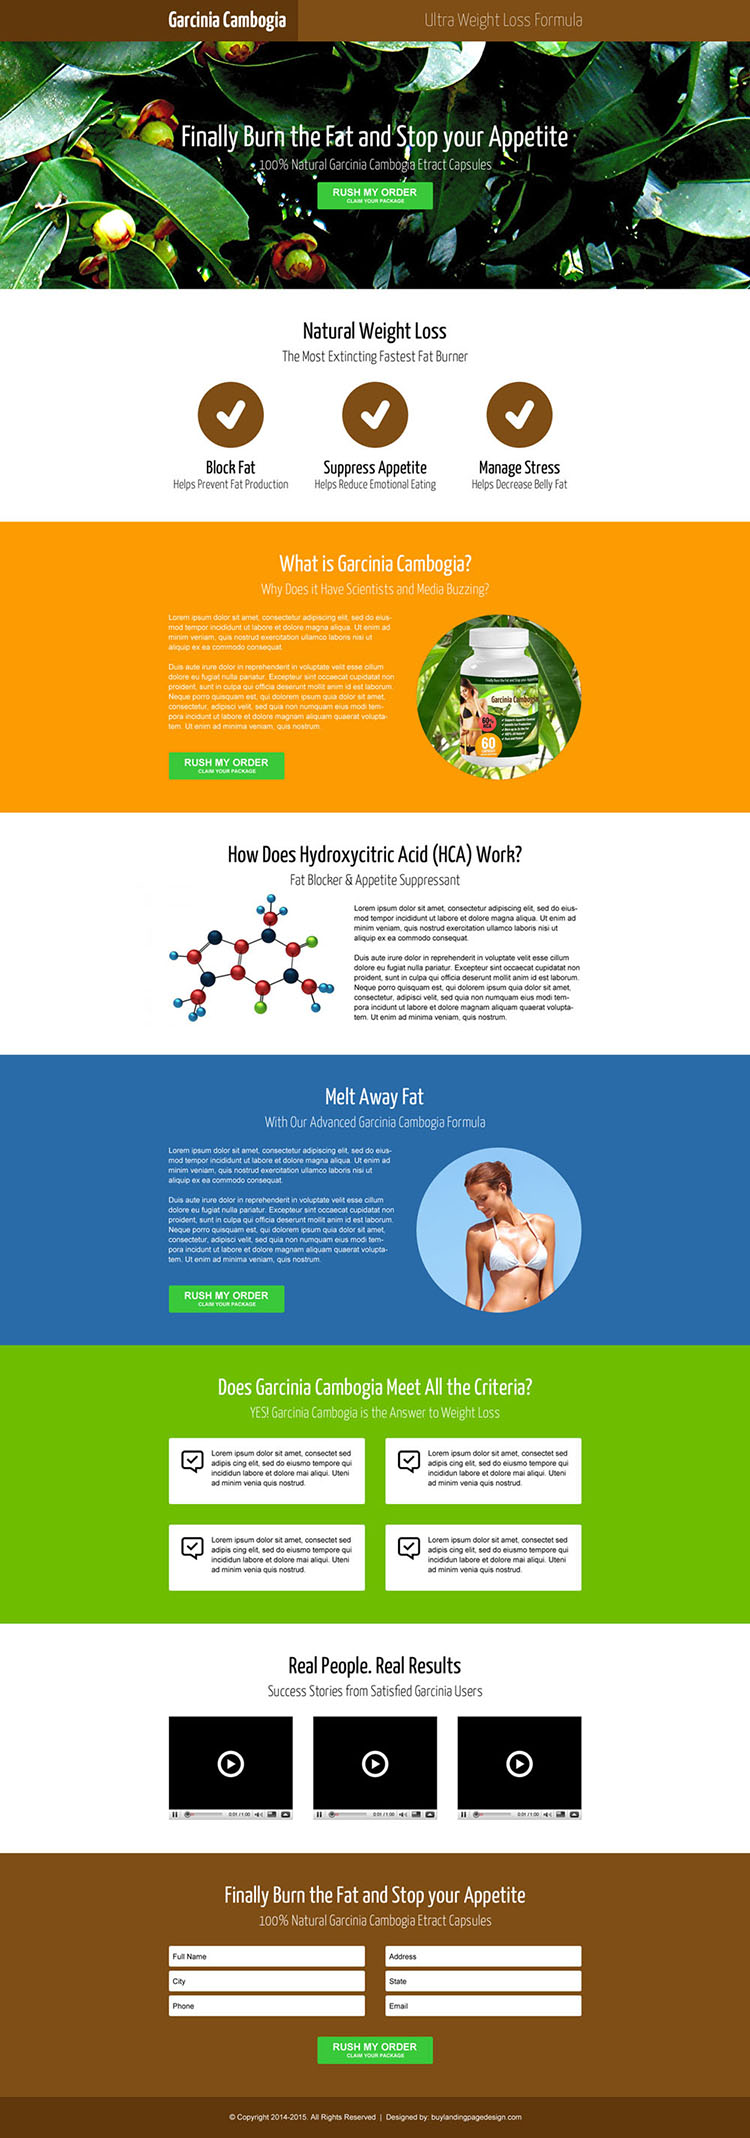 garcinia cambogia lead capture and product selling responsive landing page design